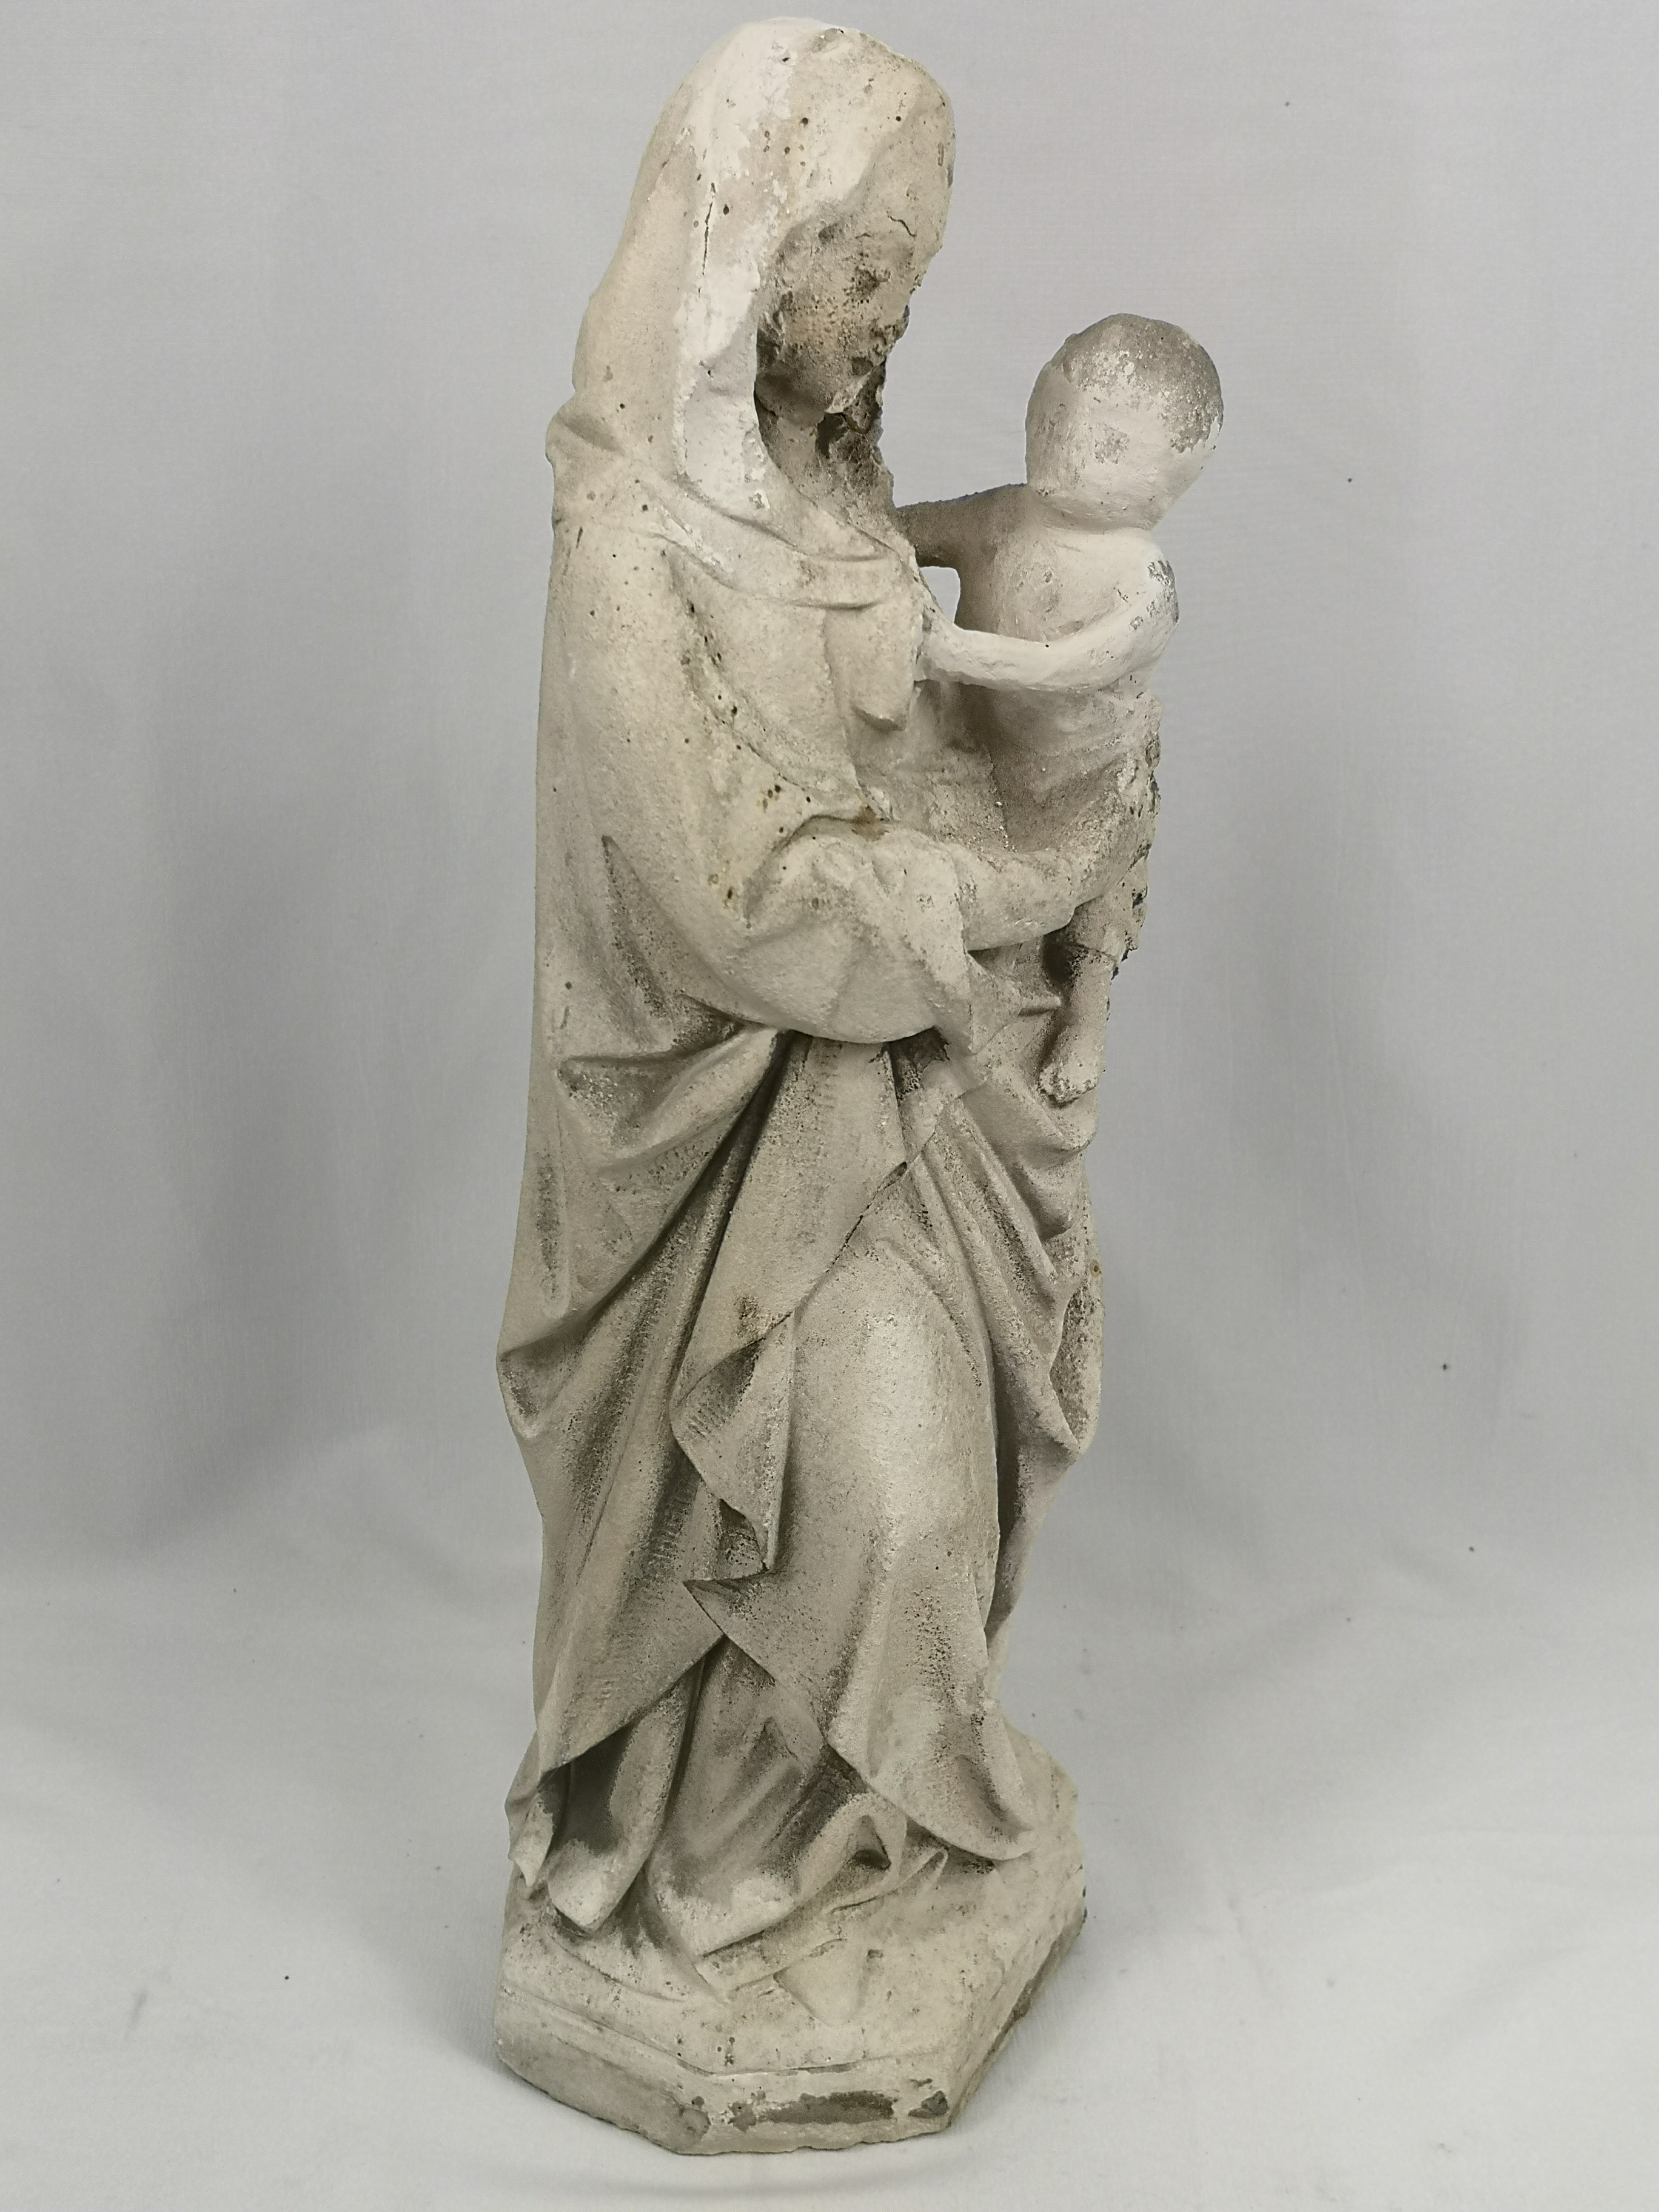 Stone carving of the Madonna and child - Image 5 of 8